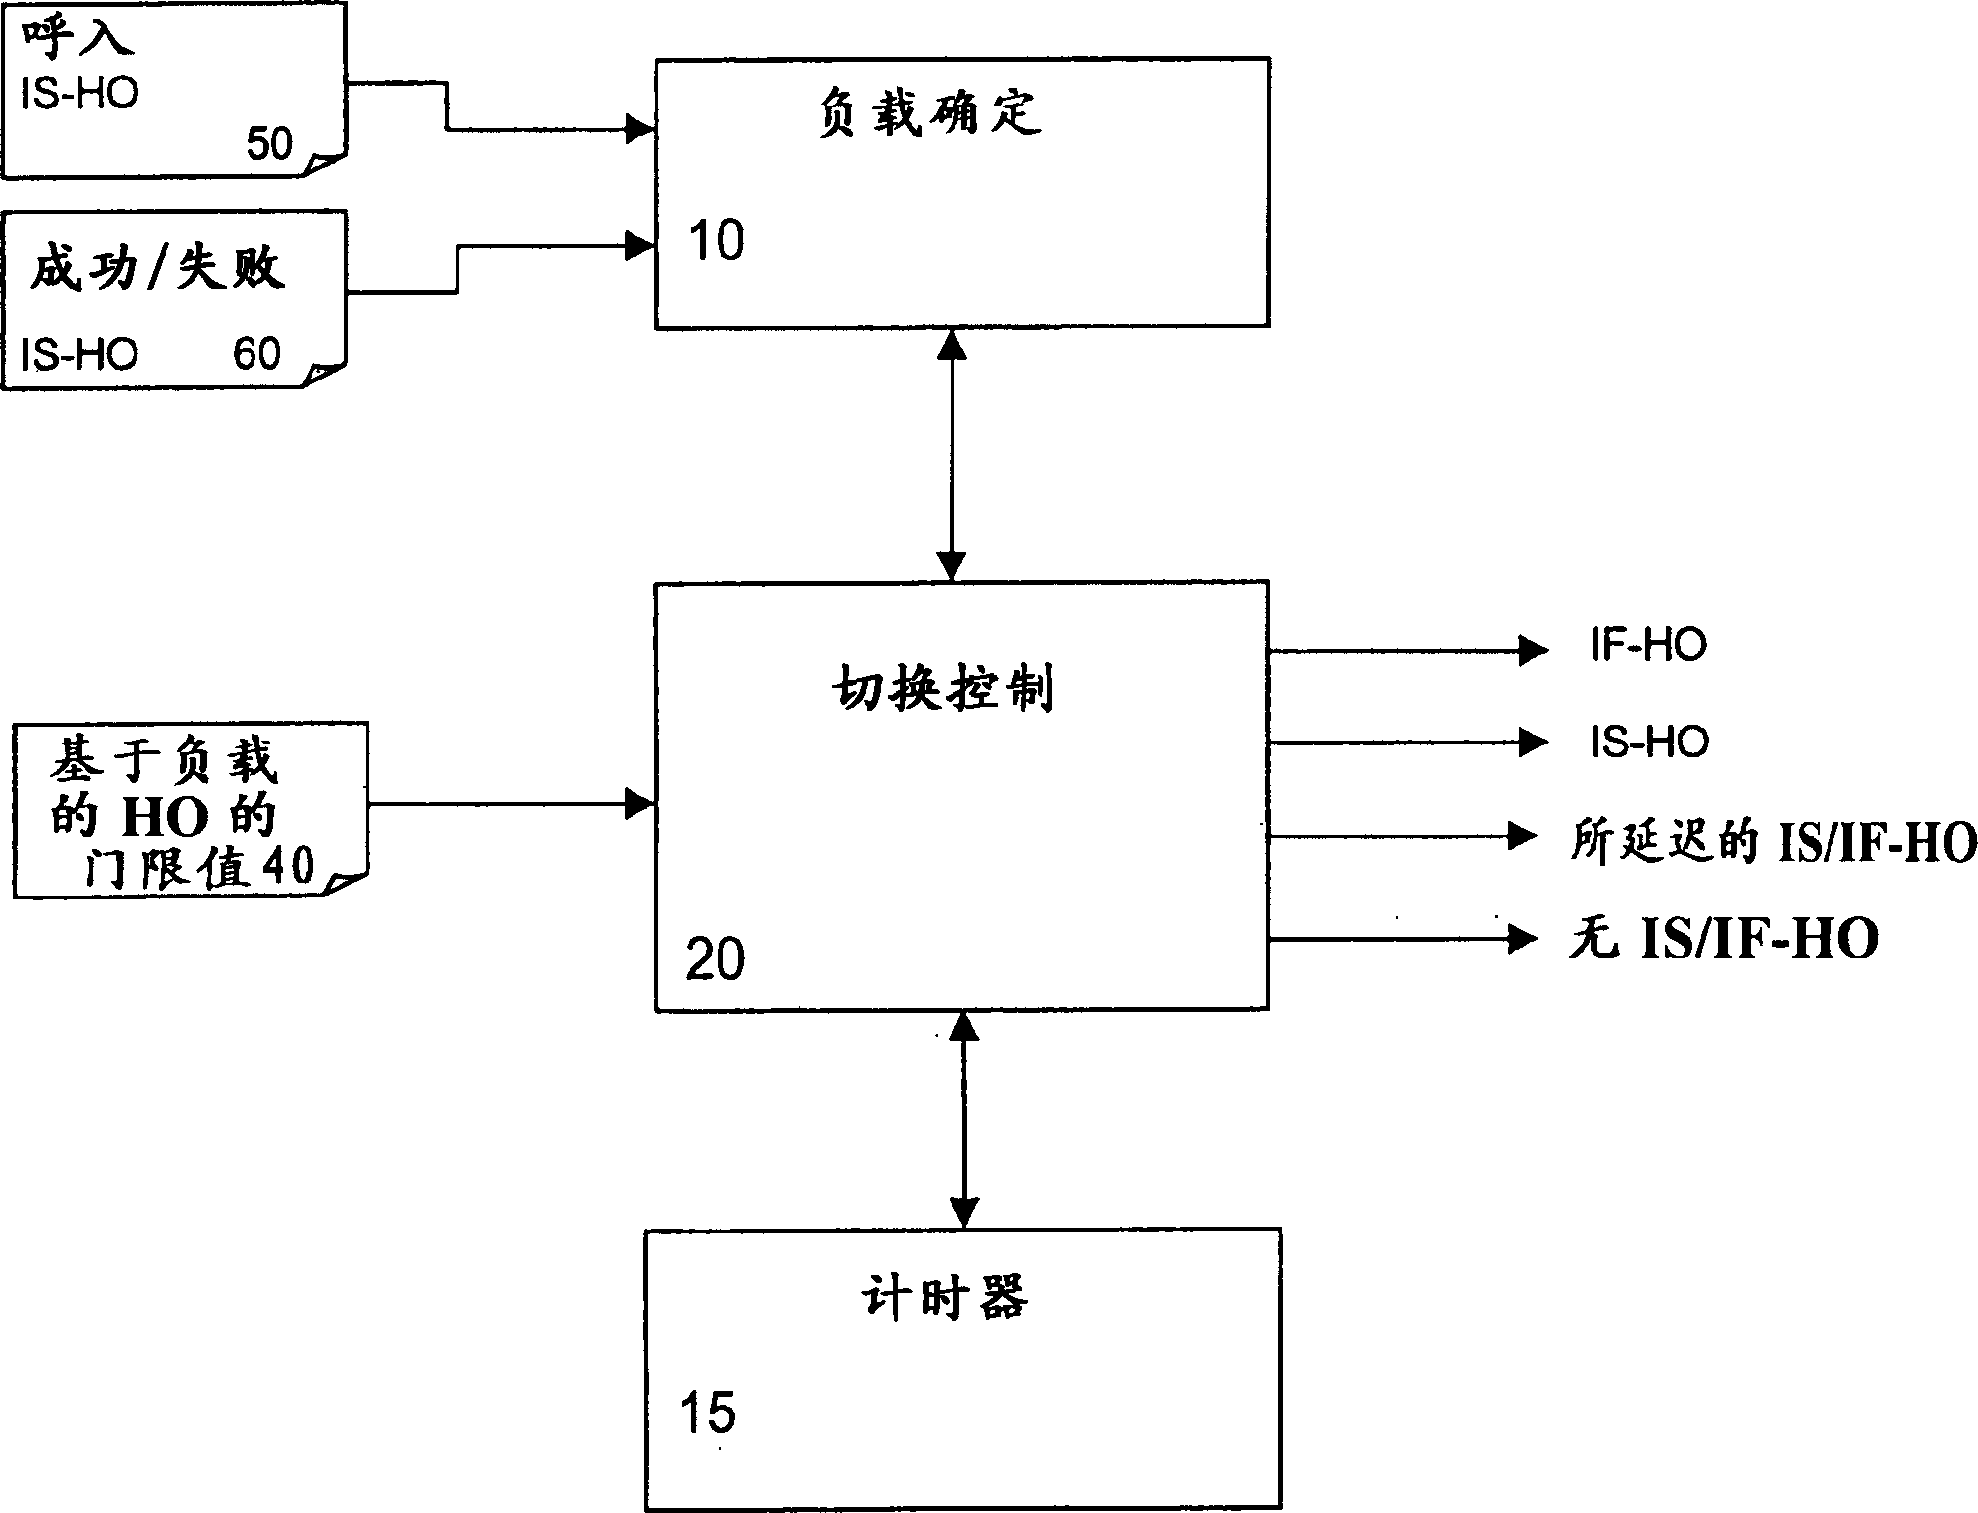 Method and network element for controlling handover